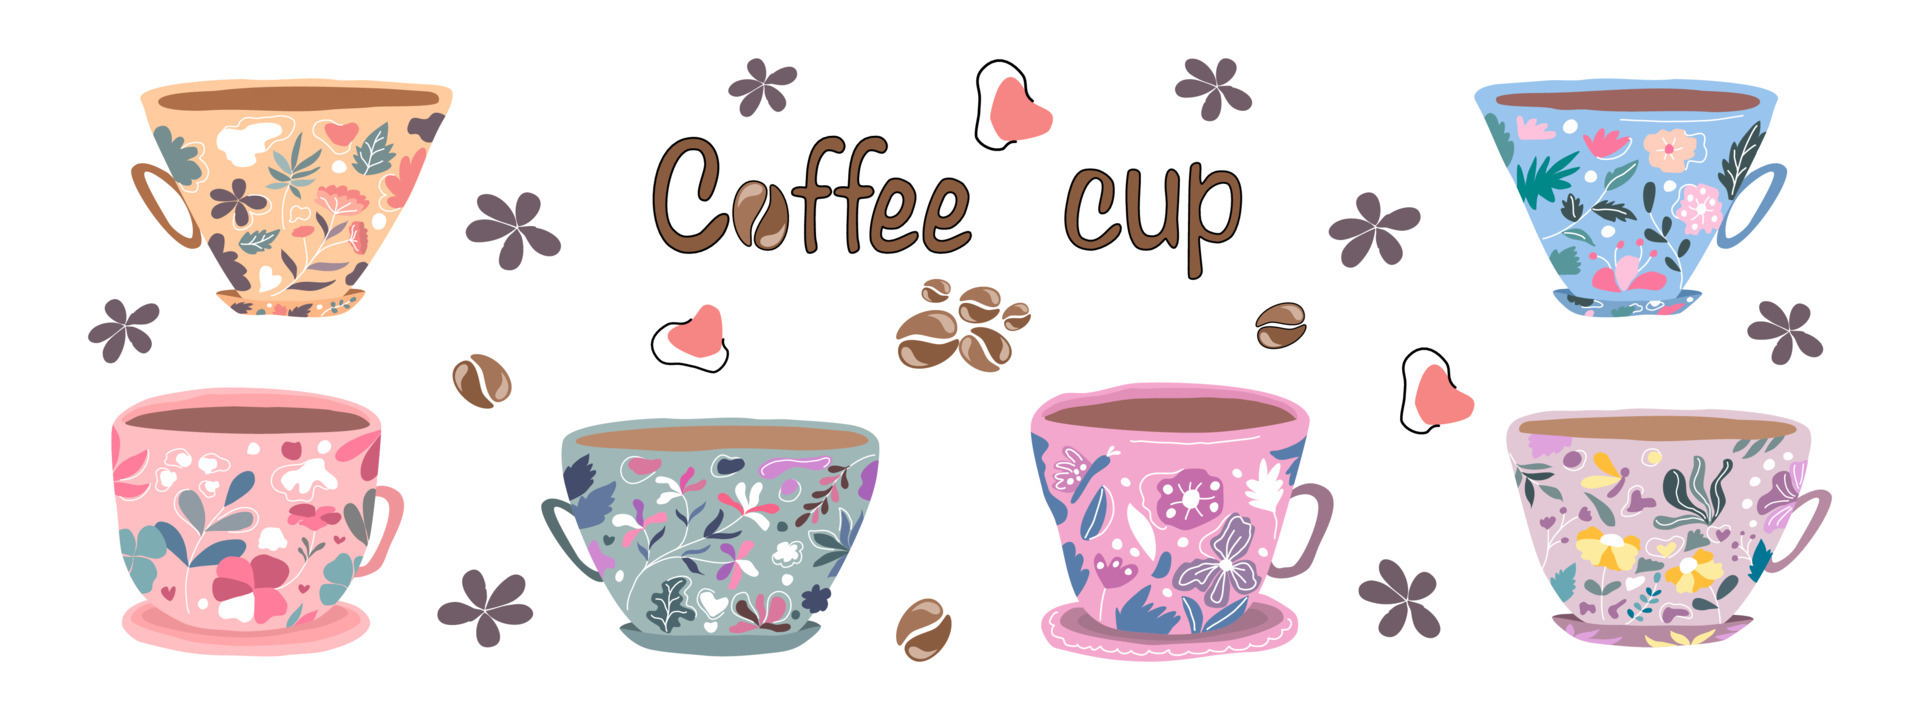 https://static.vecteezy.com/system/resources/previews/007/496/943/original/cute-vintage-coffee-cup-set-designed-in-doodle-style-for-digital-printing-background-card-decoration-coffee-shop-clothing-design-bag-sticker-pillow-scrapbook-t-shirt-design-and-more-vector.jpg